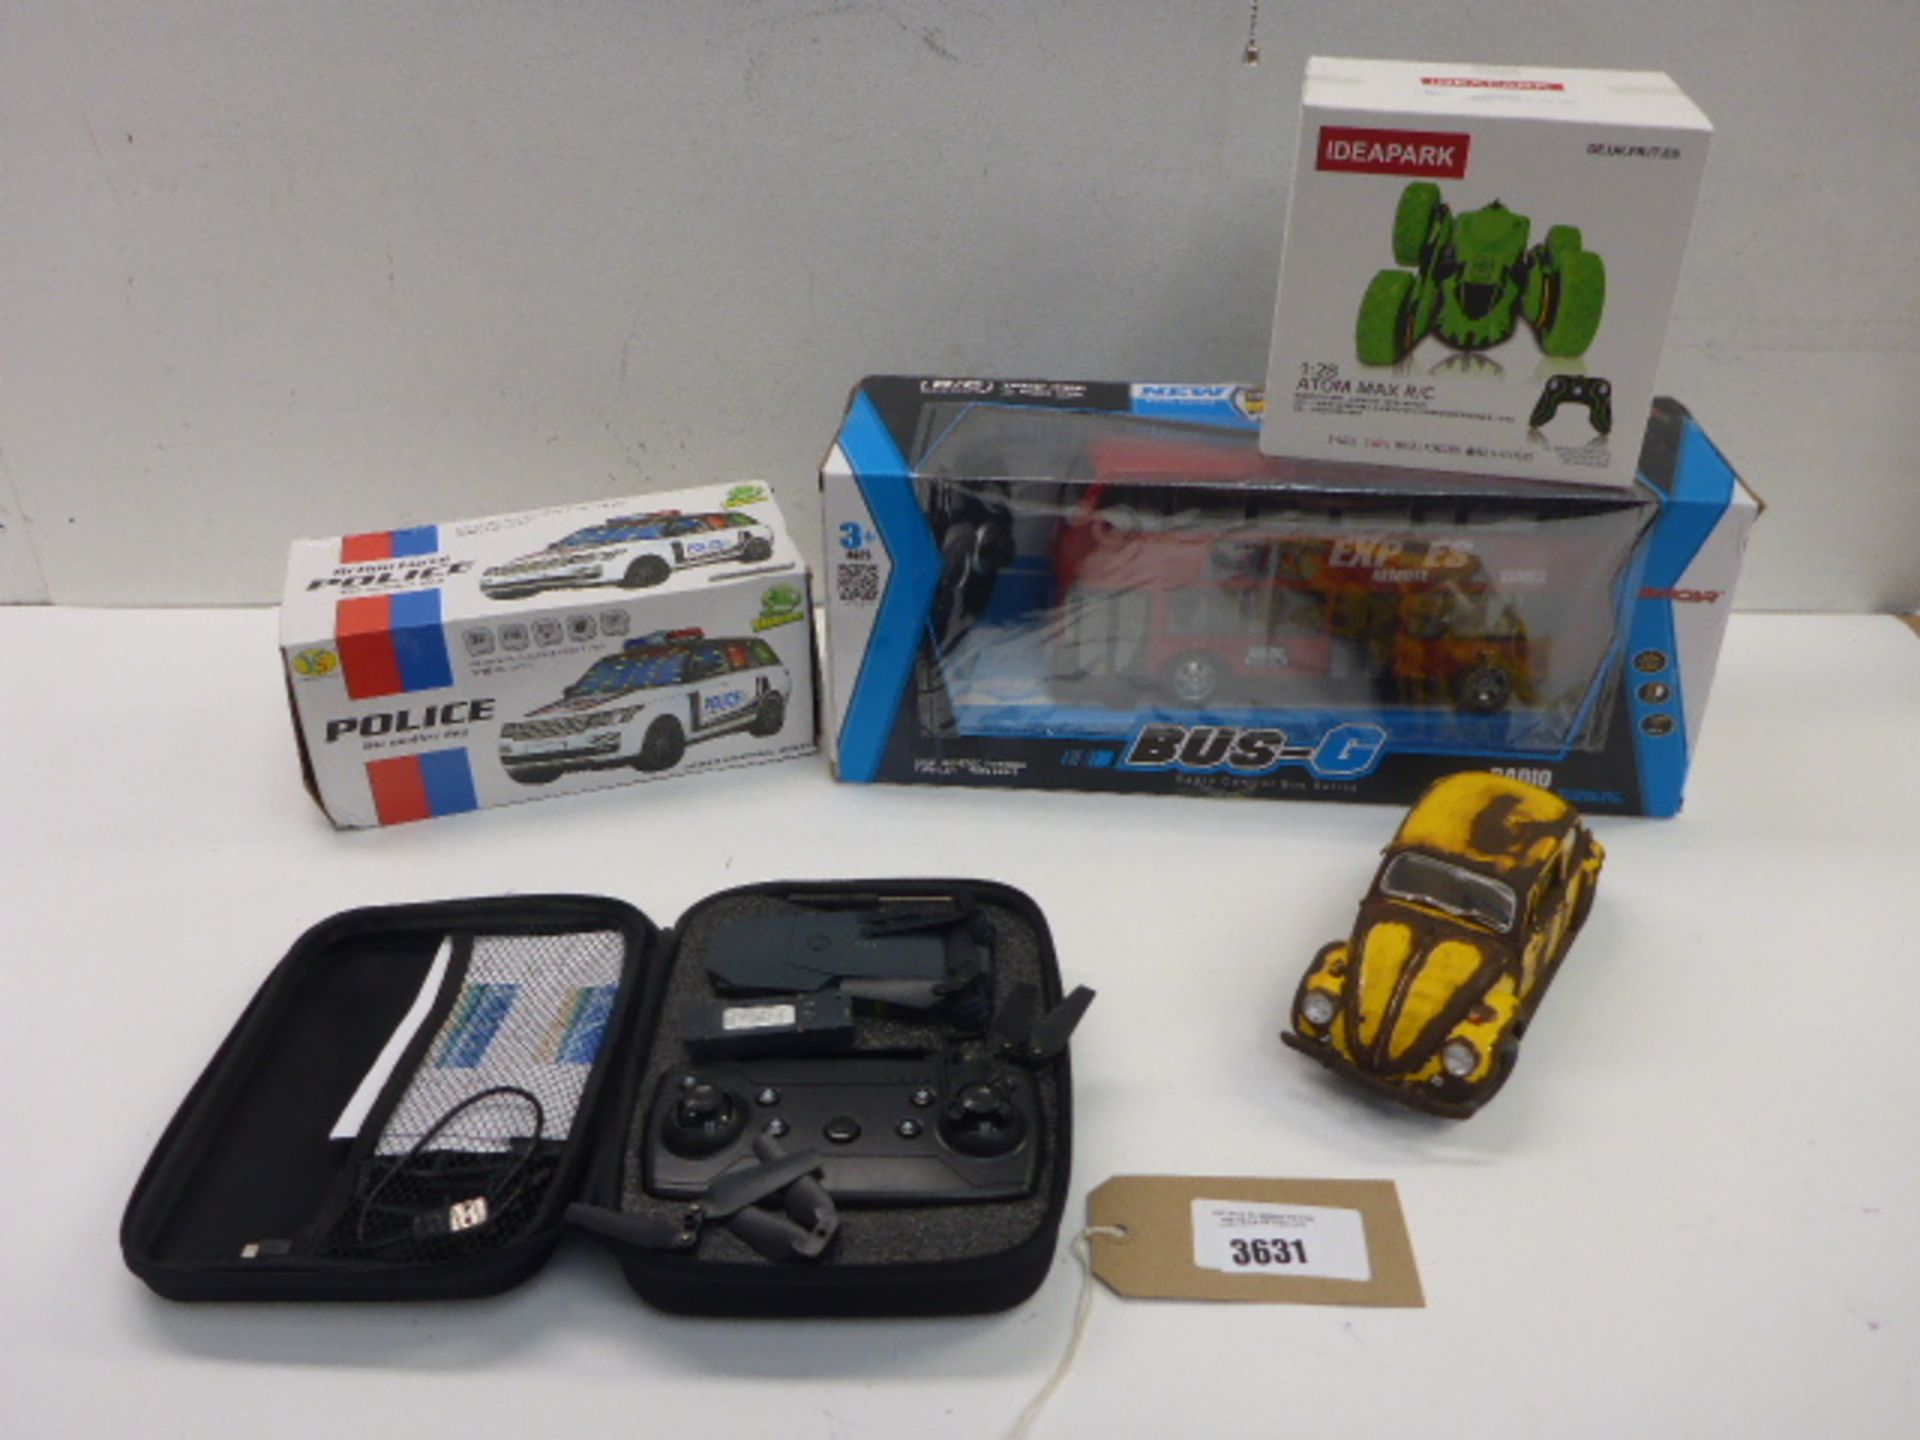 Pascal Smith VW model car, r/c double decker bus, R/C Atom Max vehicle, drone and police car